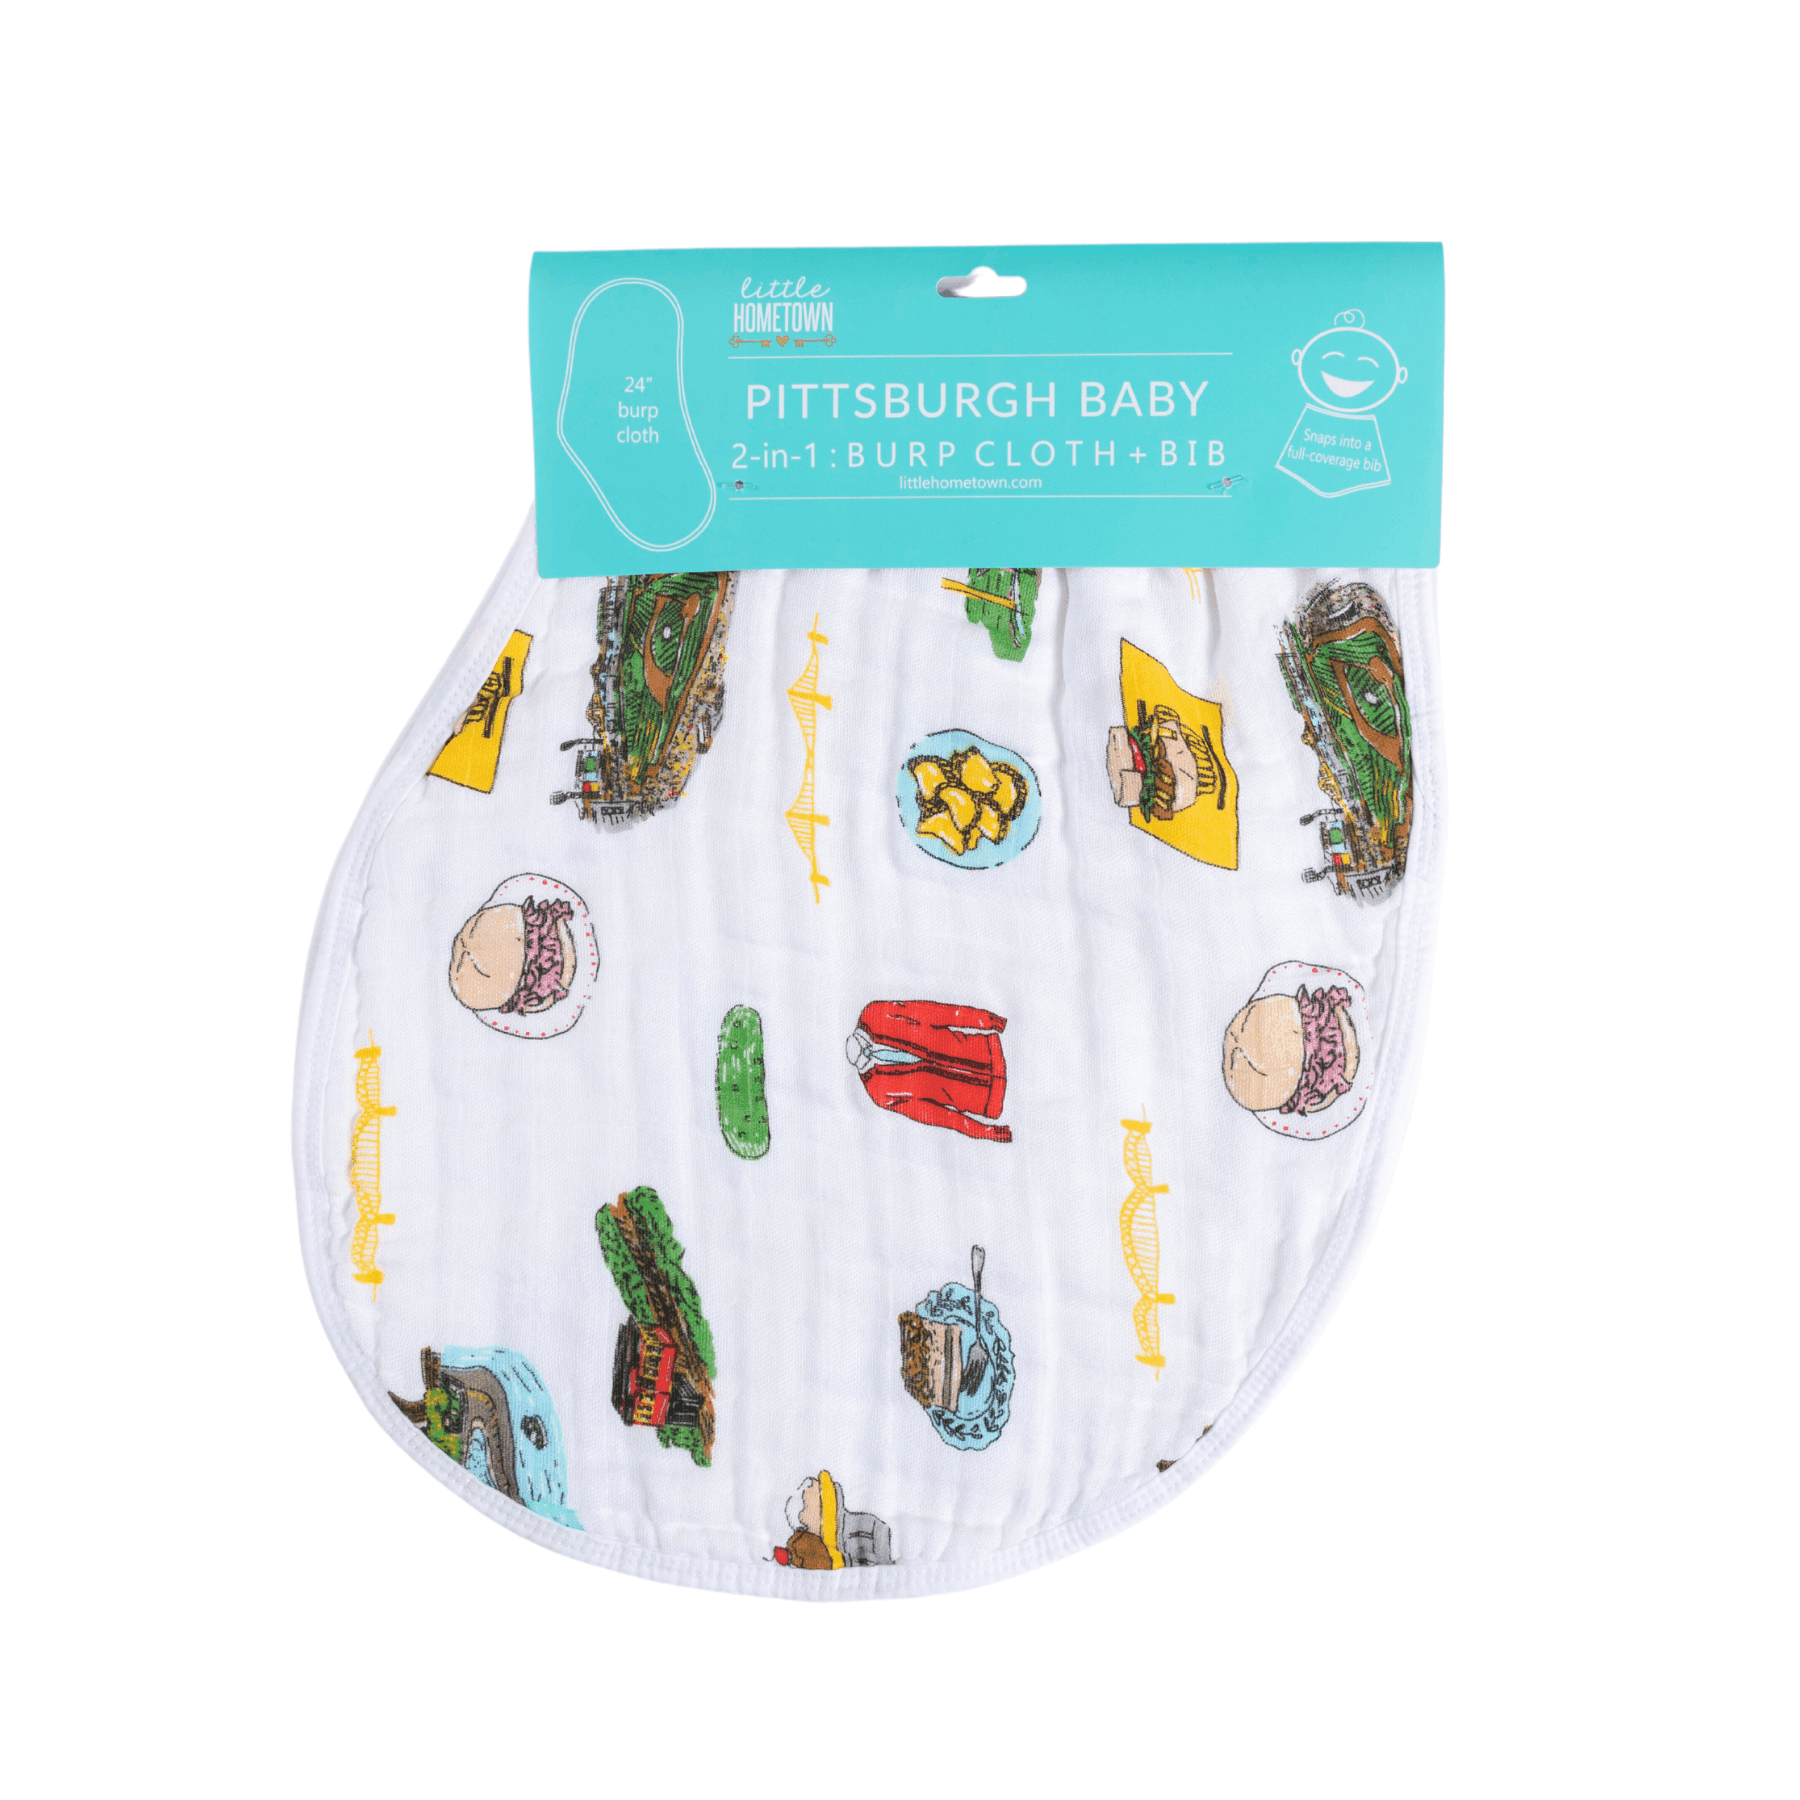 Pittsburgh-themed baby gift set with a muslin swaddle blanket and burp cloth, featuring city landmarks and icons.